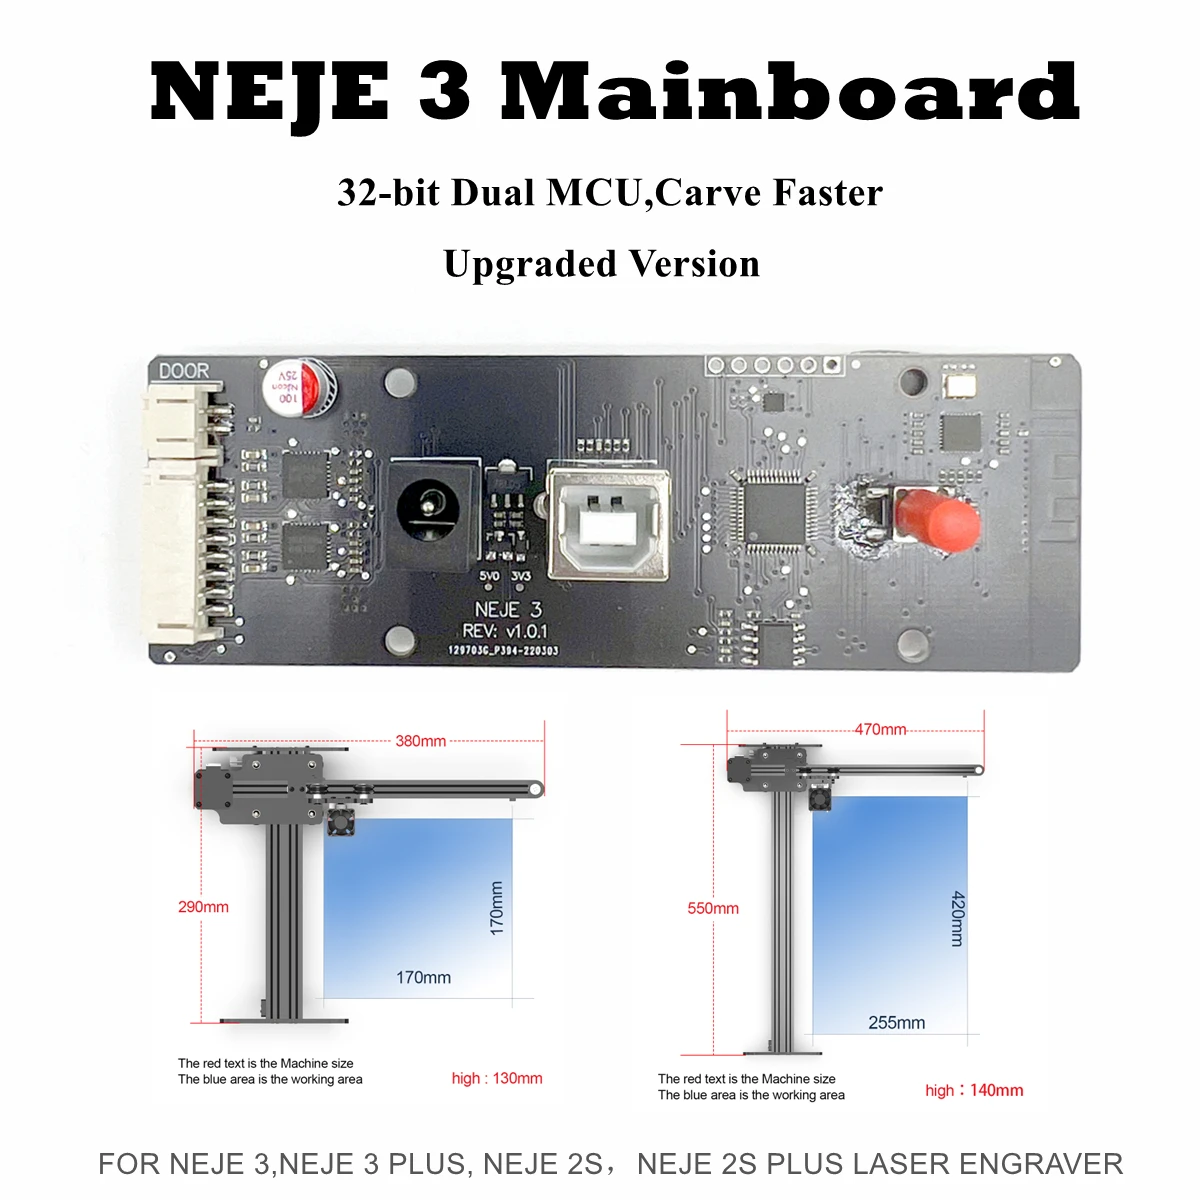 NEJE Laser Engraver Mainboard With 32-bit Dual MCU for NEJE Master 2s/NEJE 3 Plus 255X420mm Laser Engraver Mainboard Replacement